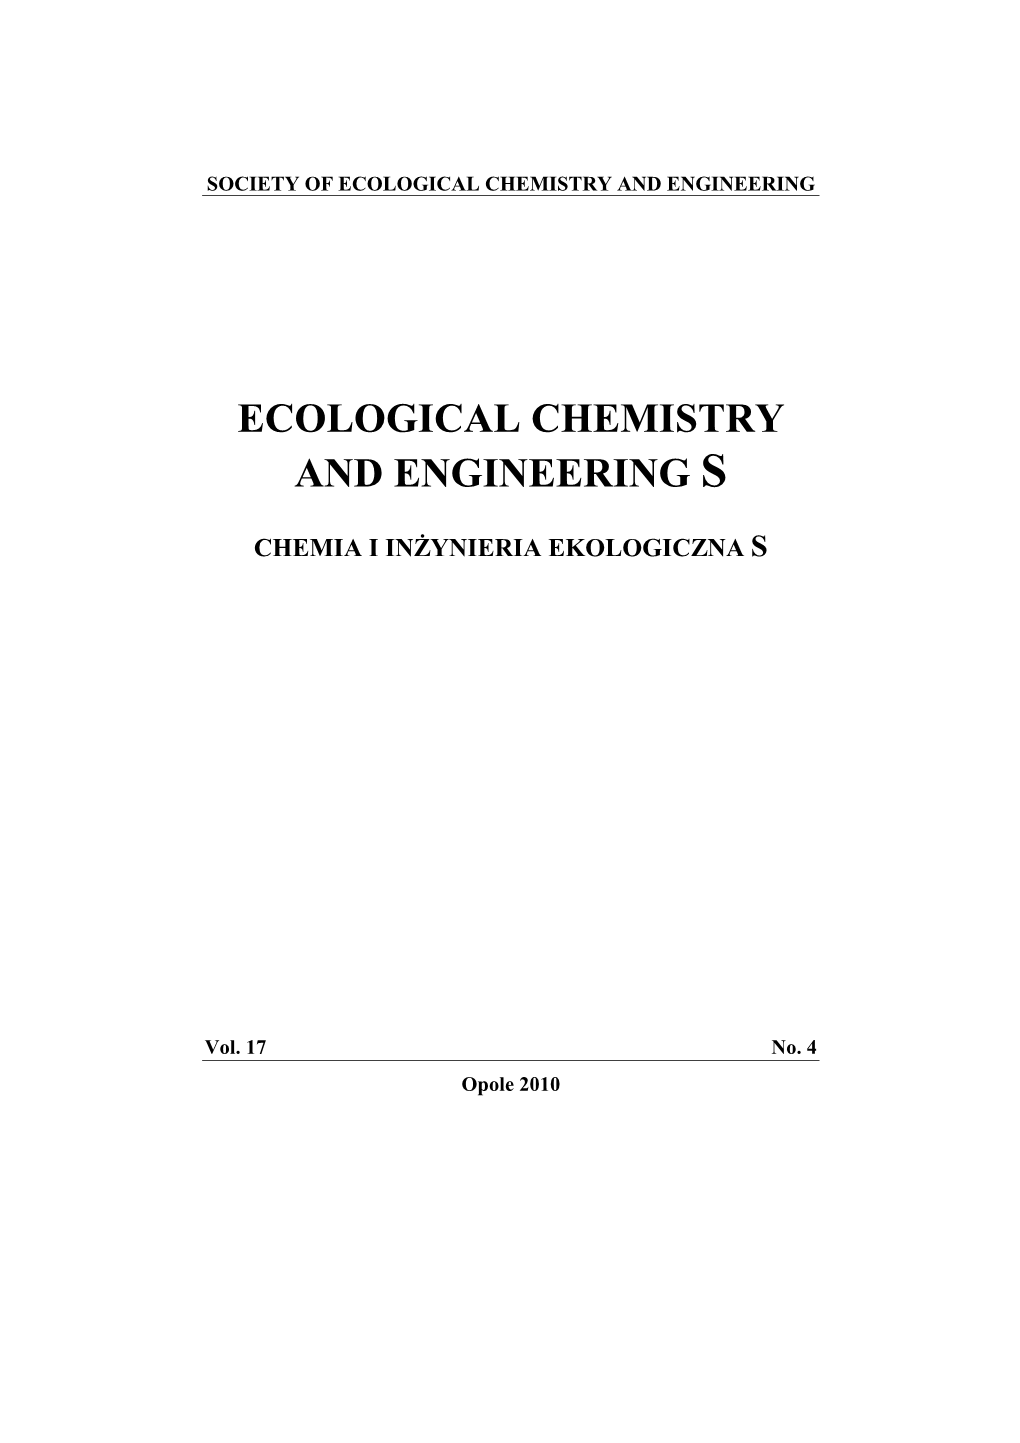 Ecological Chemistry and Engineering S